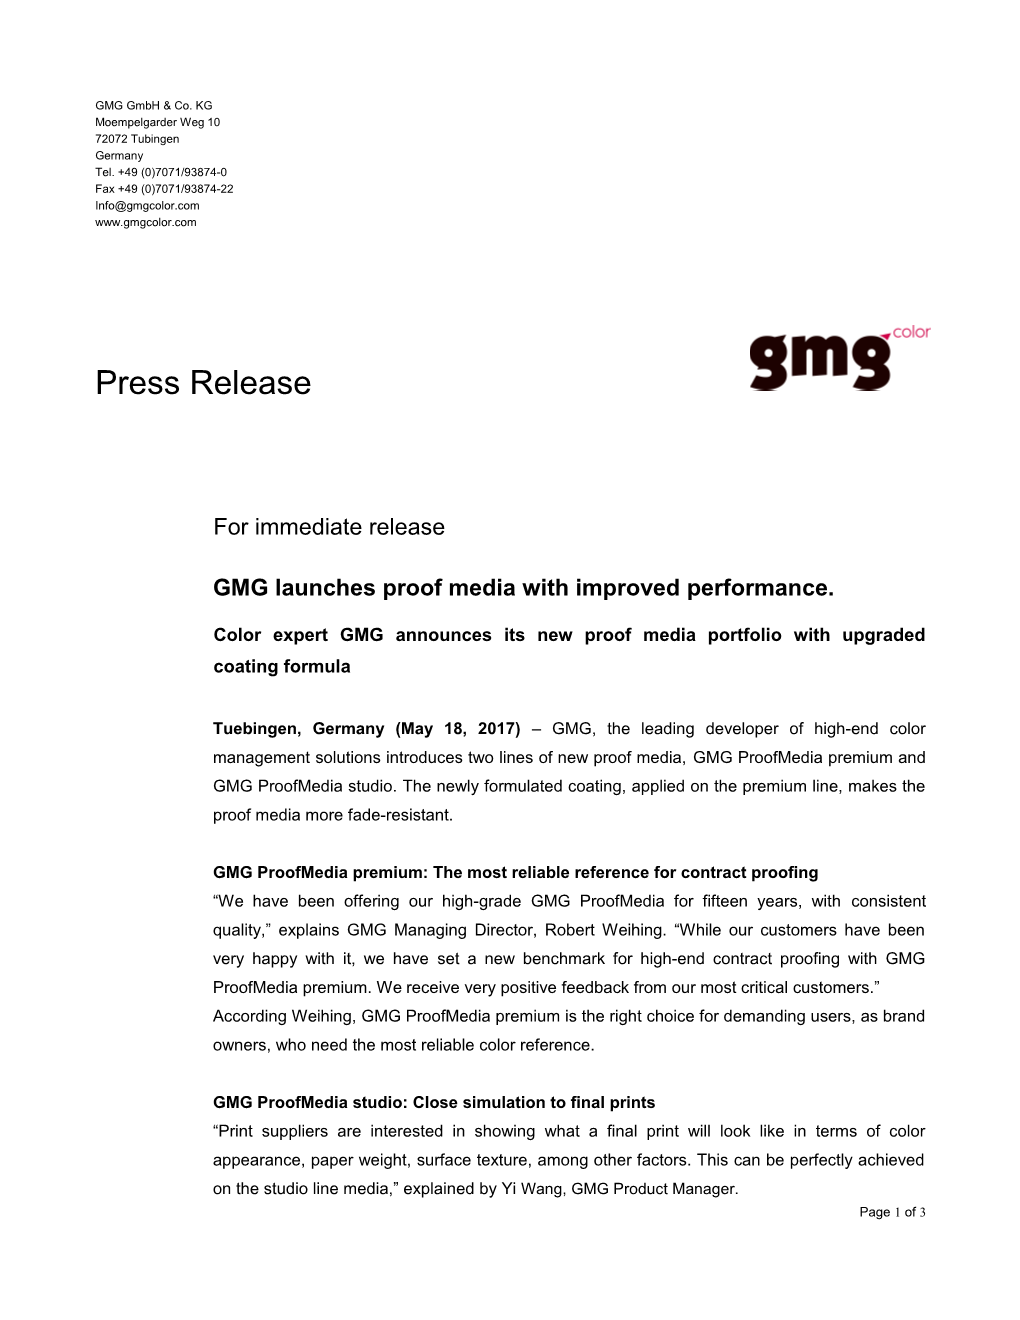 GMG Launches Proof Media with Improved Performance